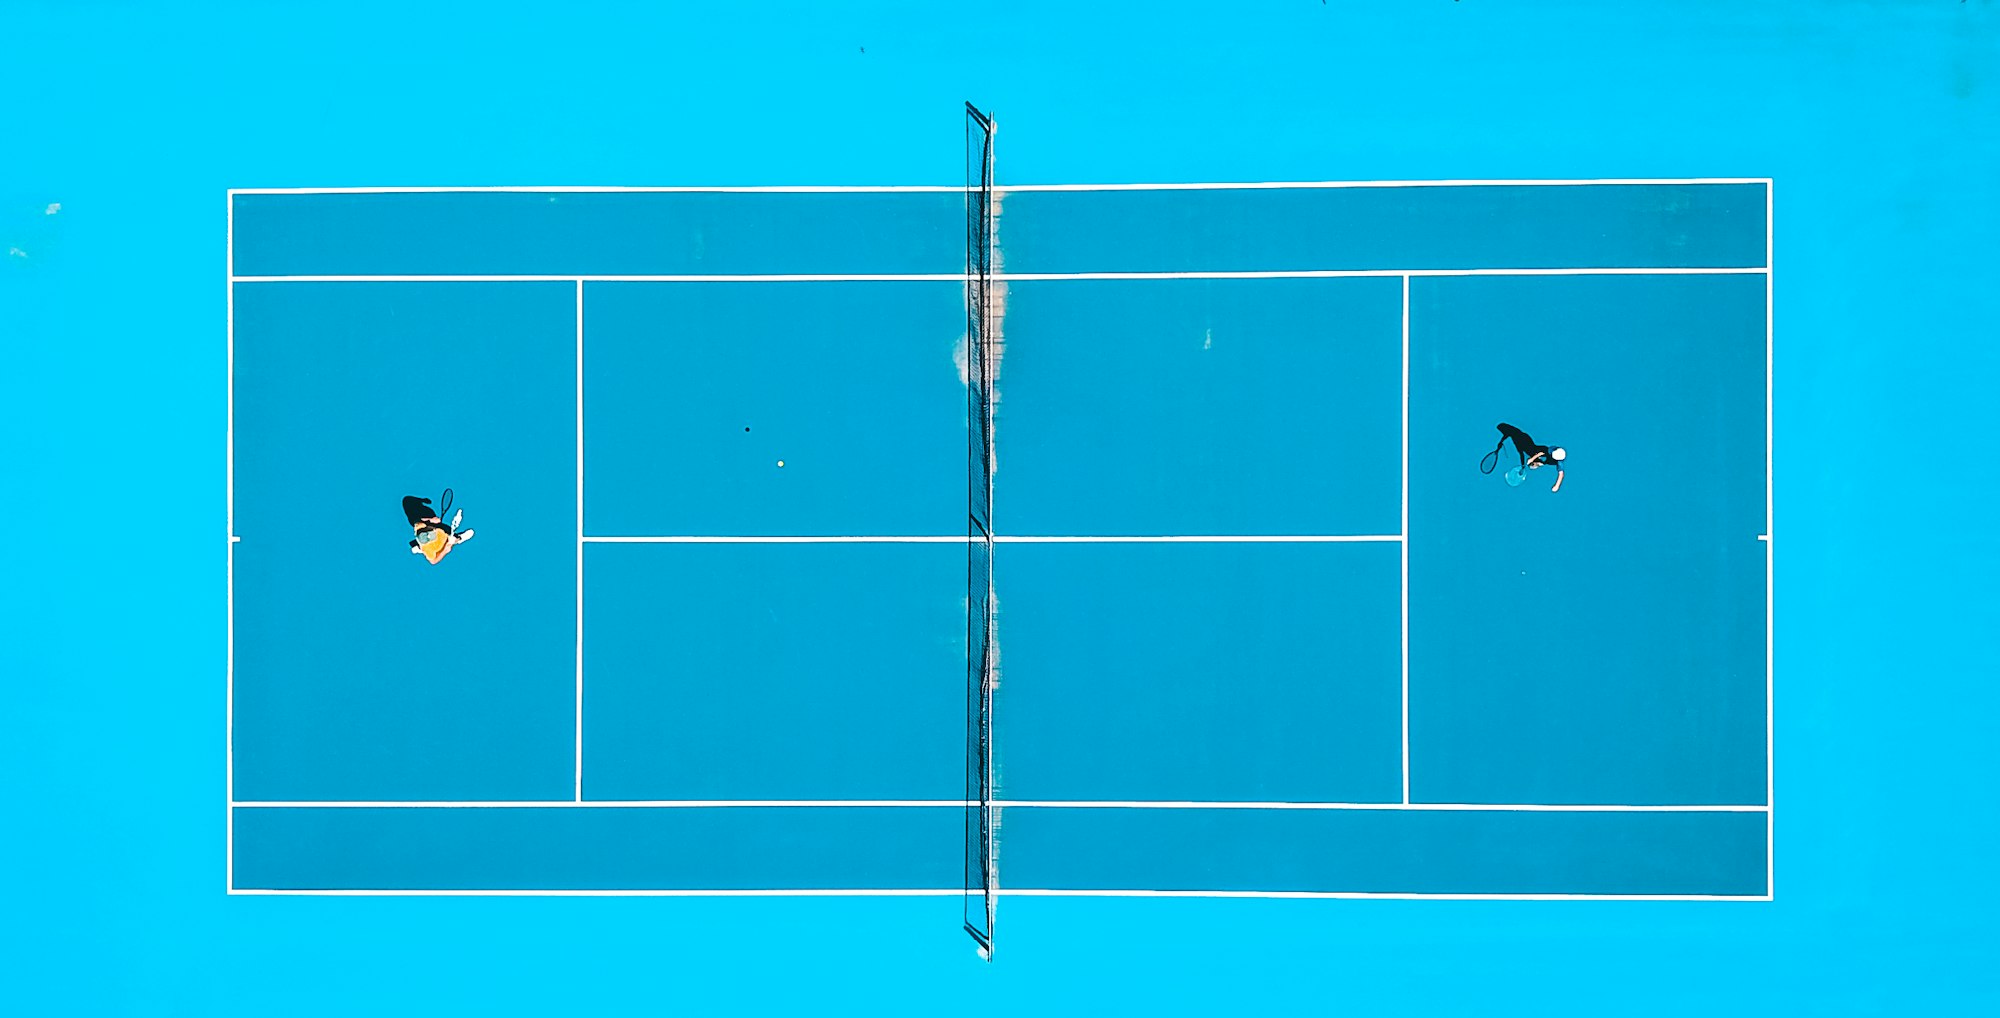 What Comprises a Match in Tennis